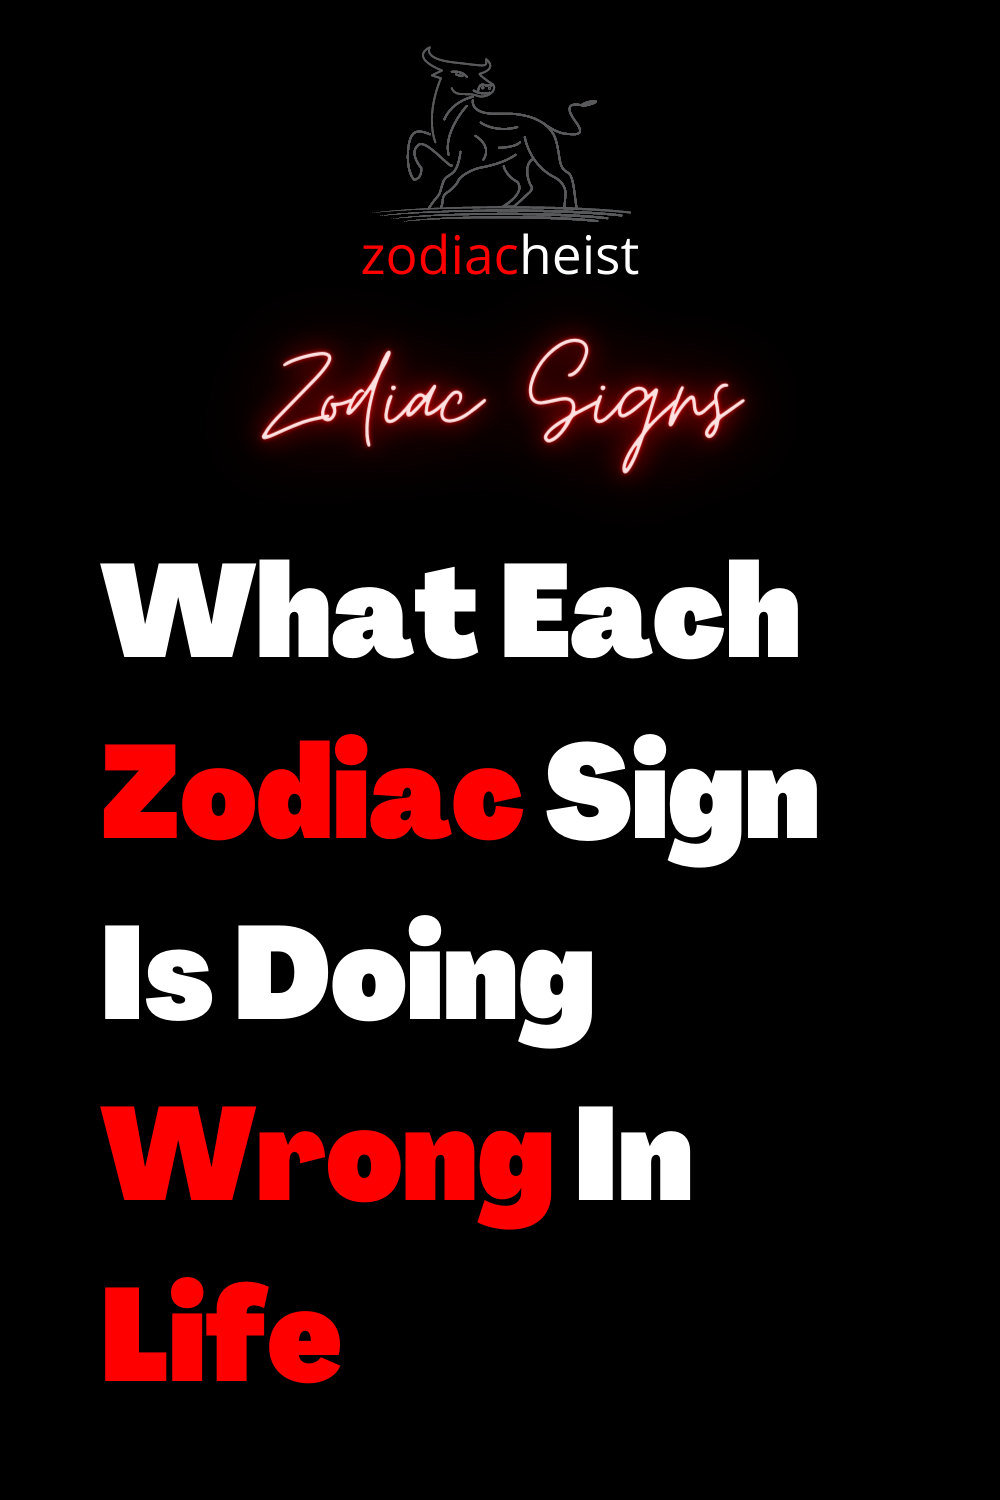 What Each Zodiac Sign Is Doing Wrong In Life